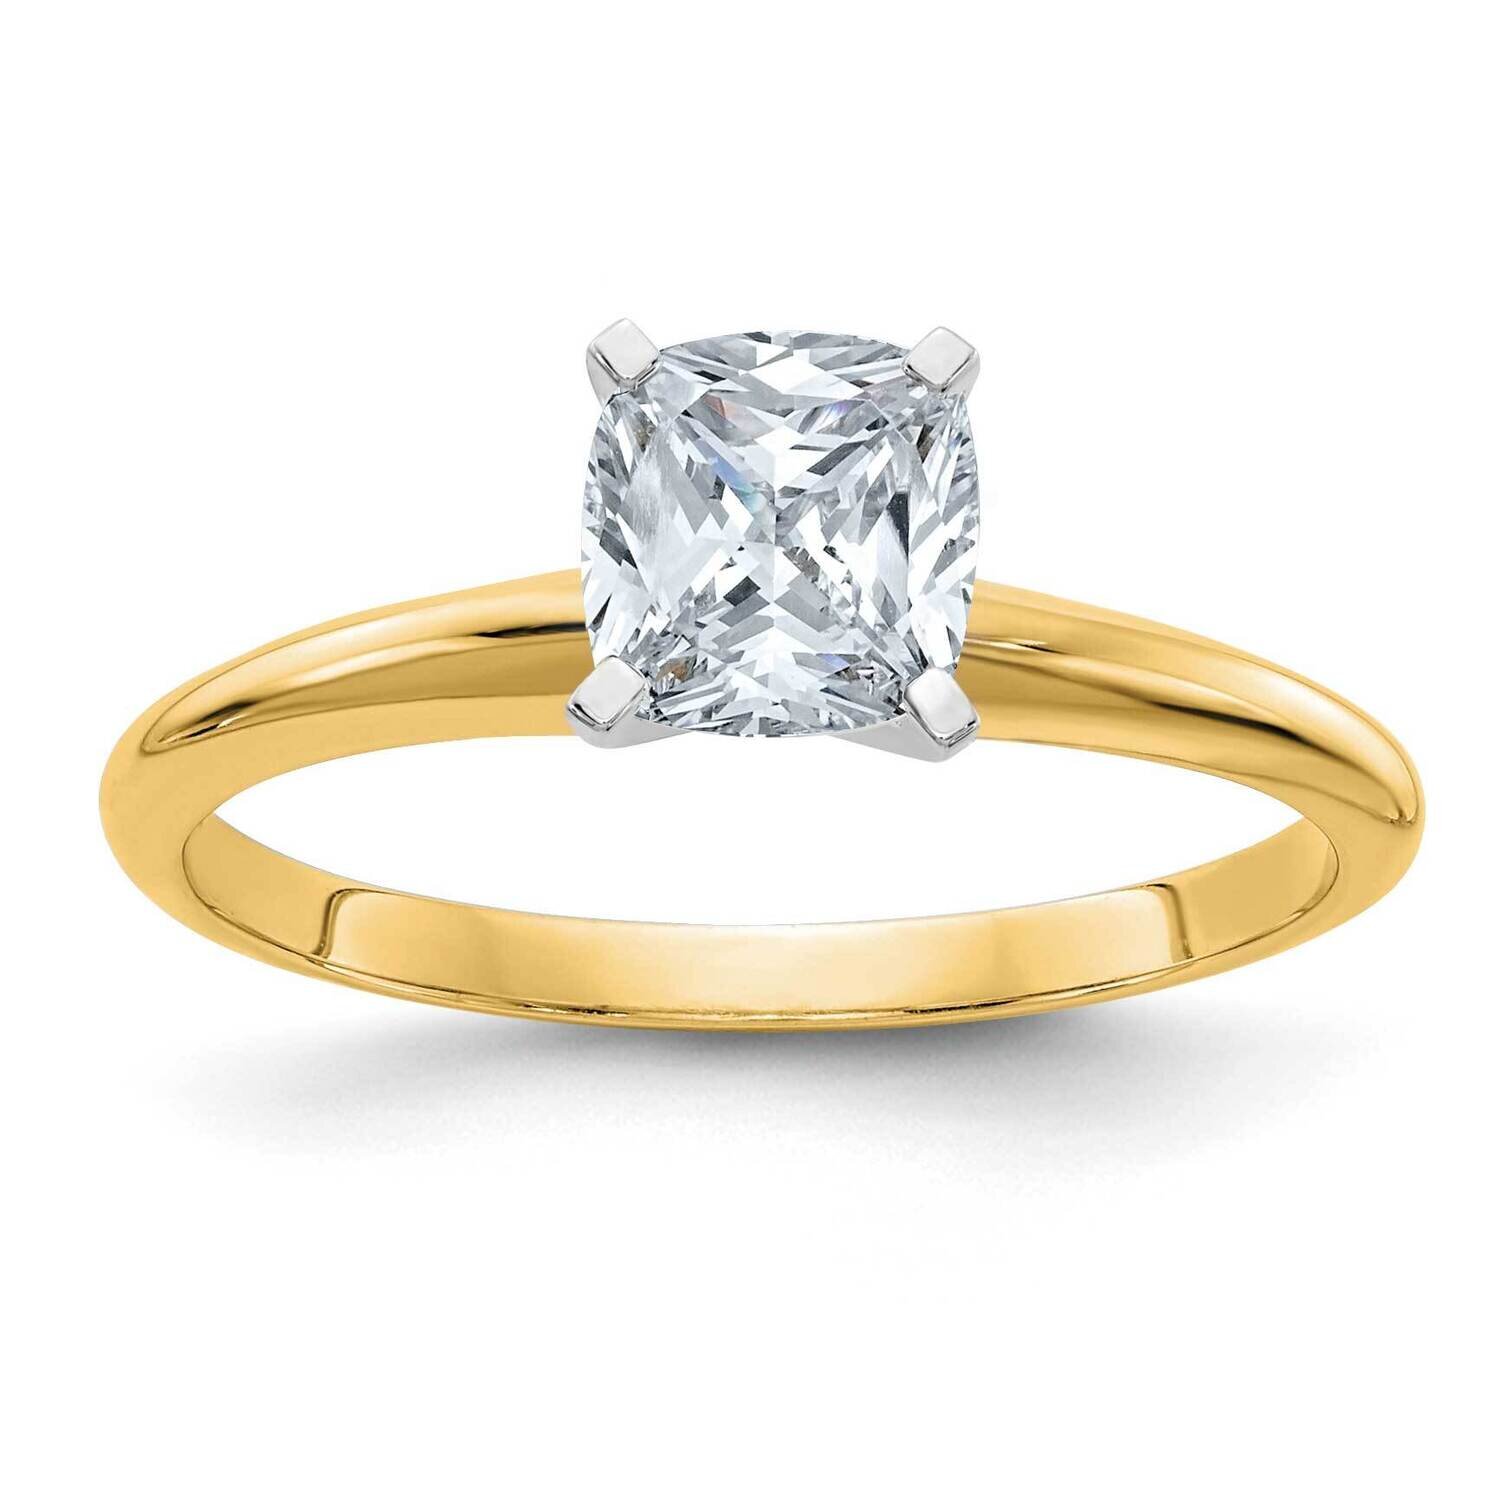 1ct. D E F Pure Light Cushion Moissanite Solitaire Ring 14k Gold YGSH13C-12MP-8